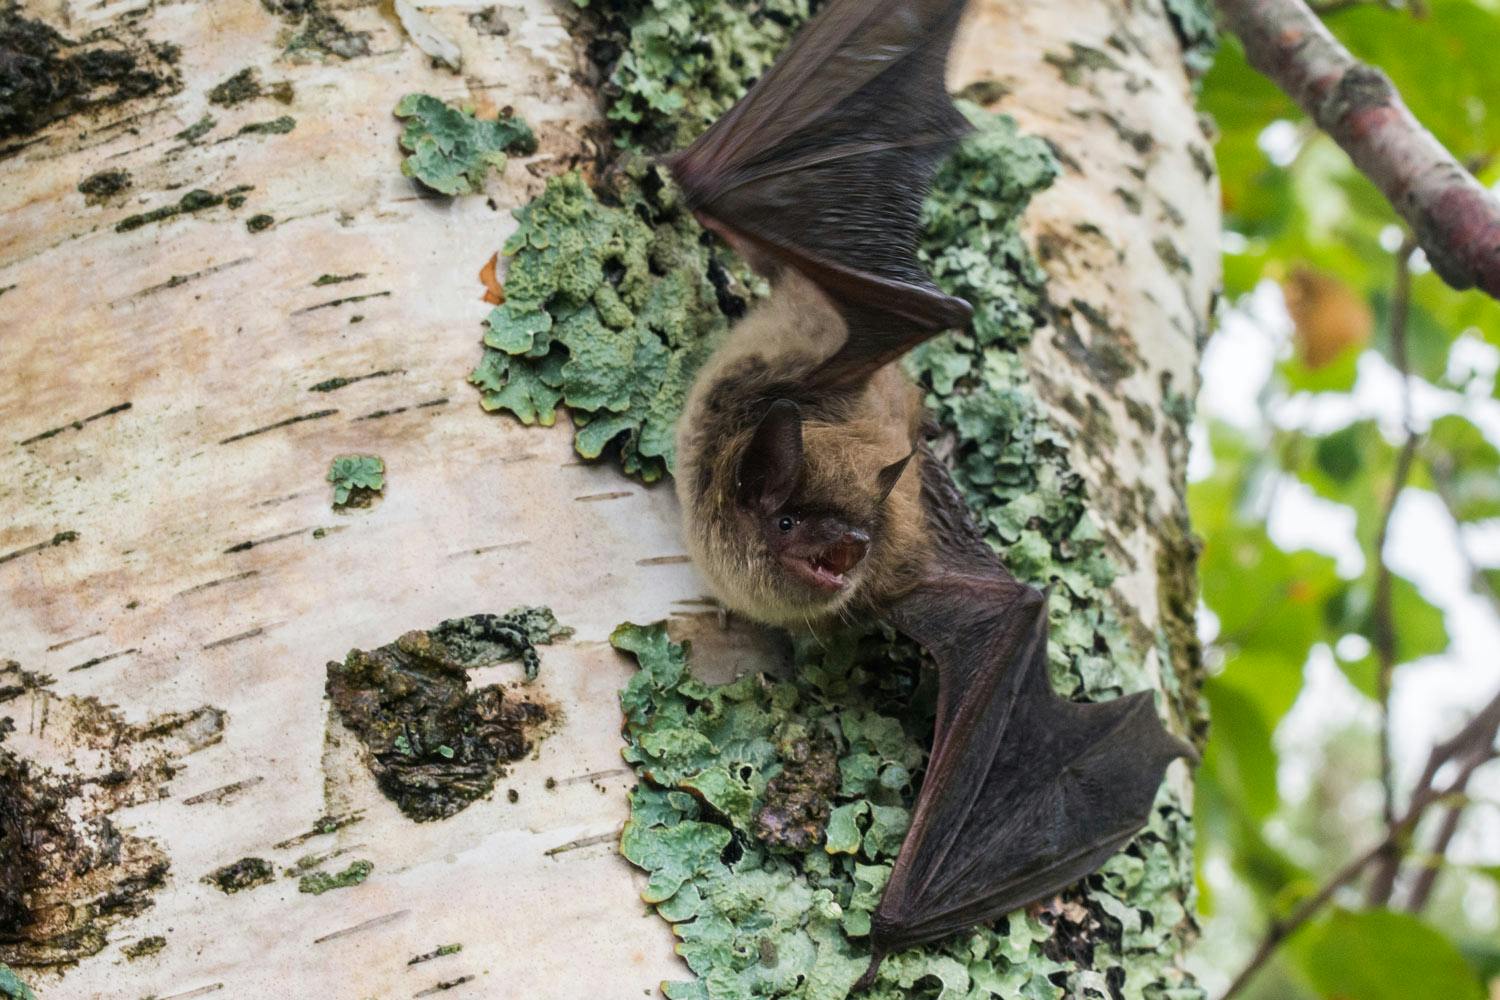 A little brown myotis bat with fuzzy, beige fur clings onto a patch of green lichen on a tree with white bark.